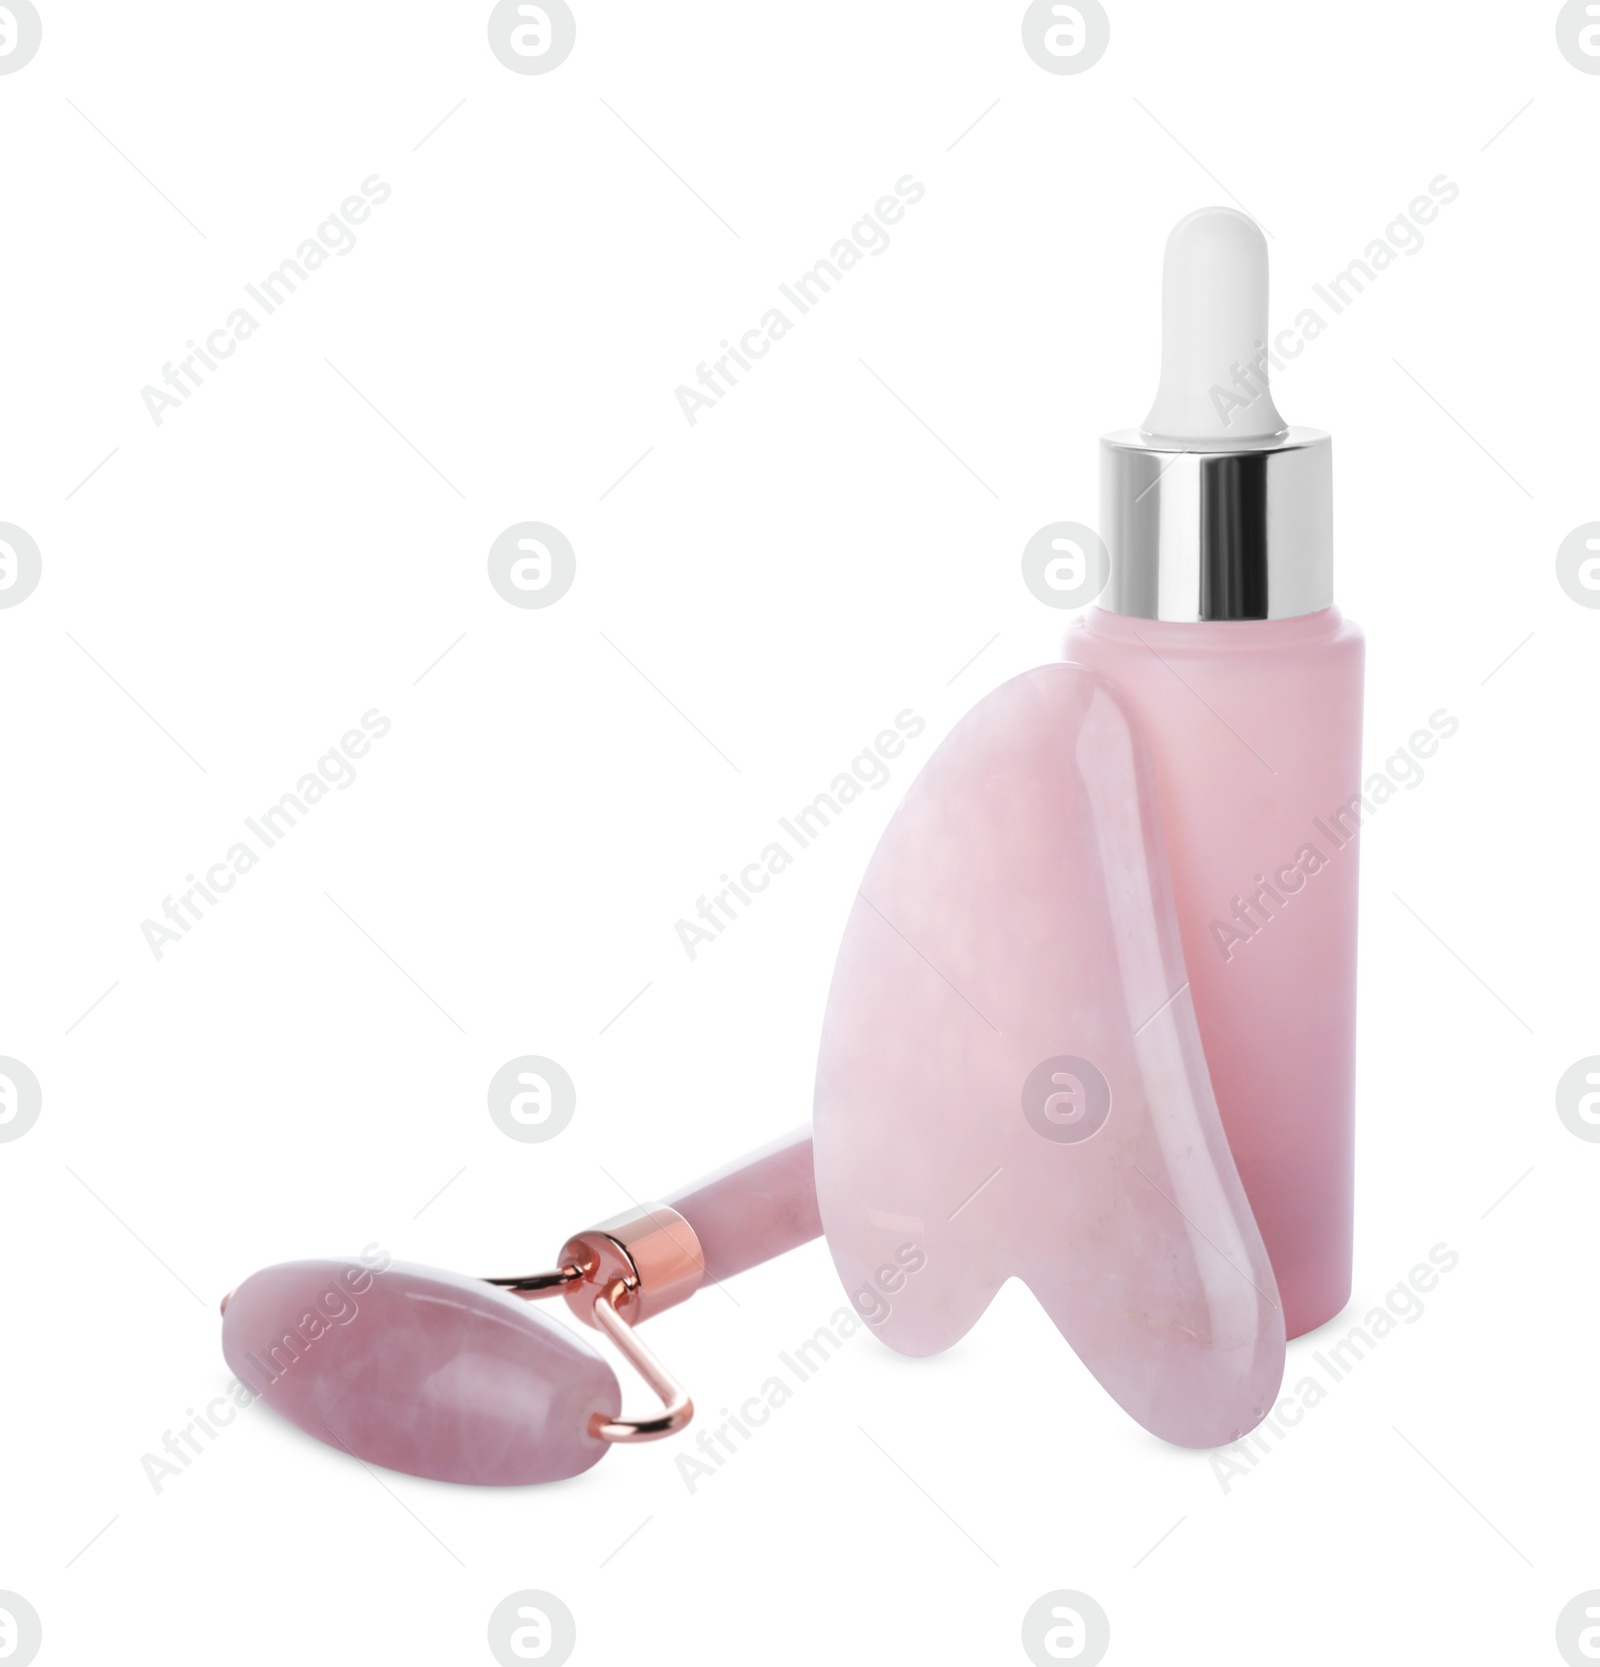 Photo of Rose quartz gua sha tool, facial roller and bottle of serum isolated on white